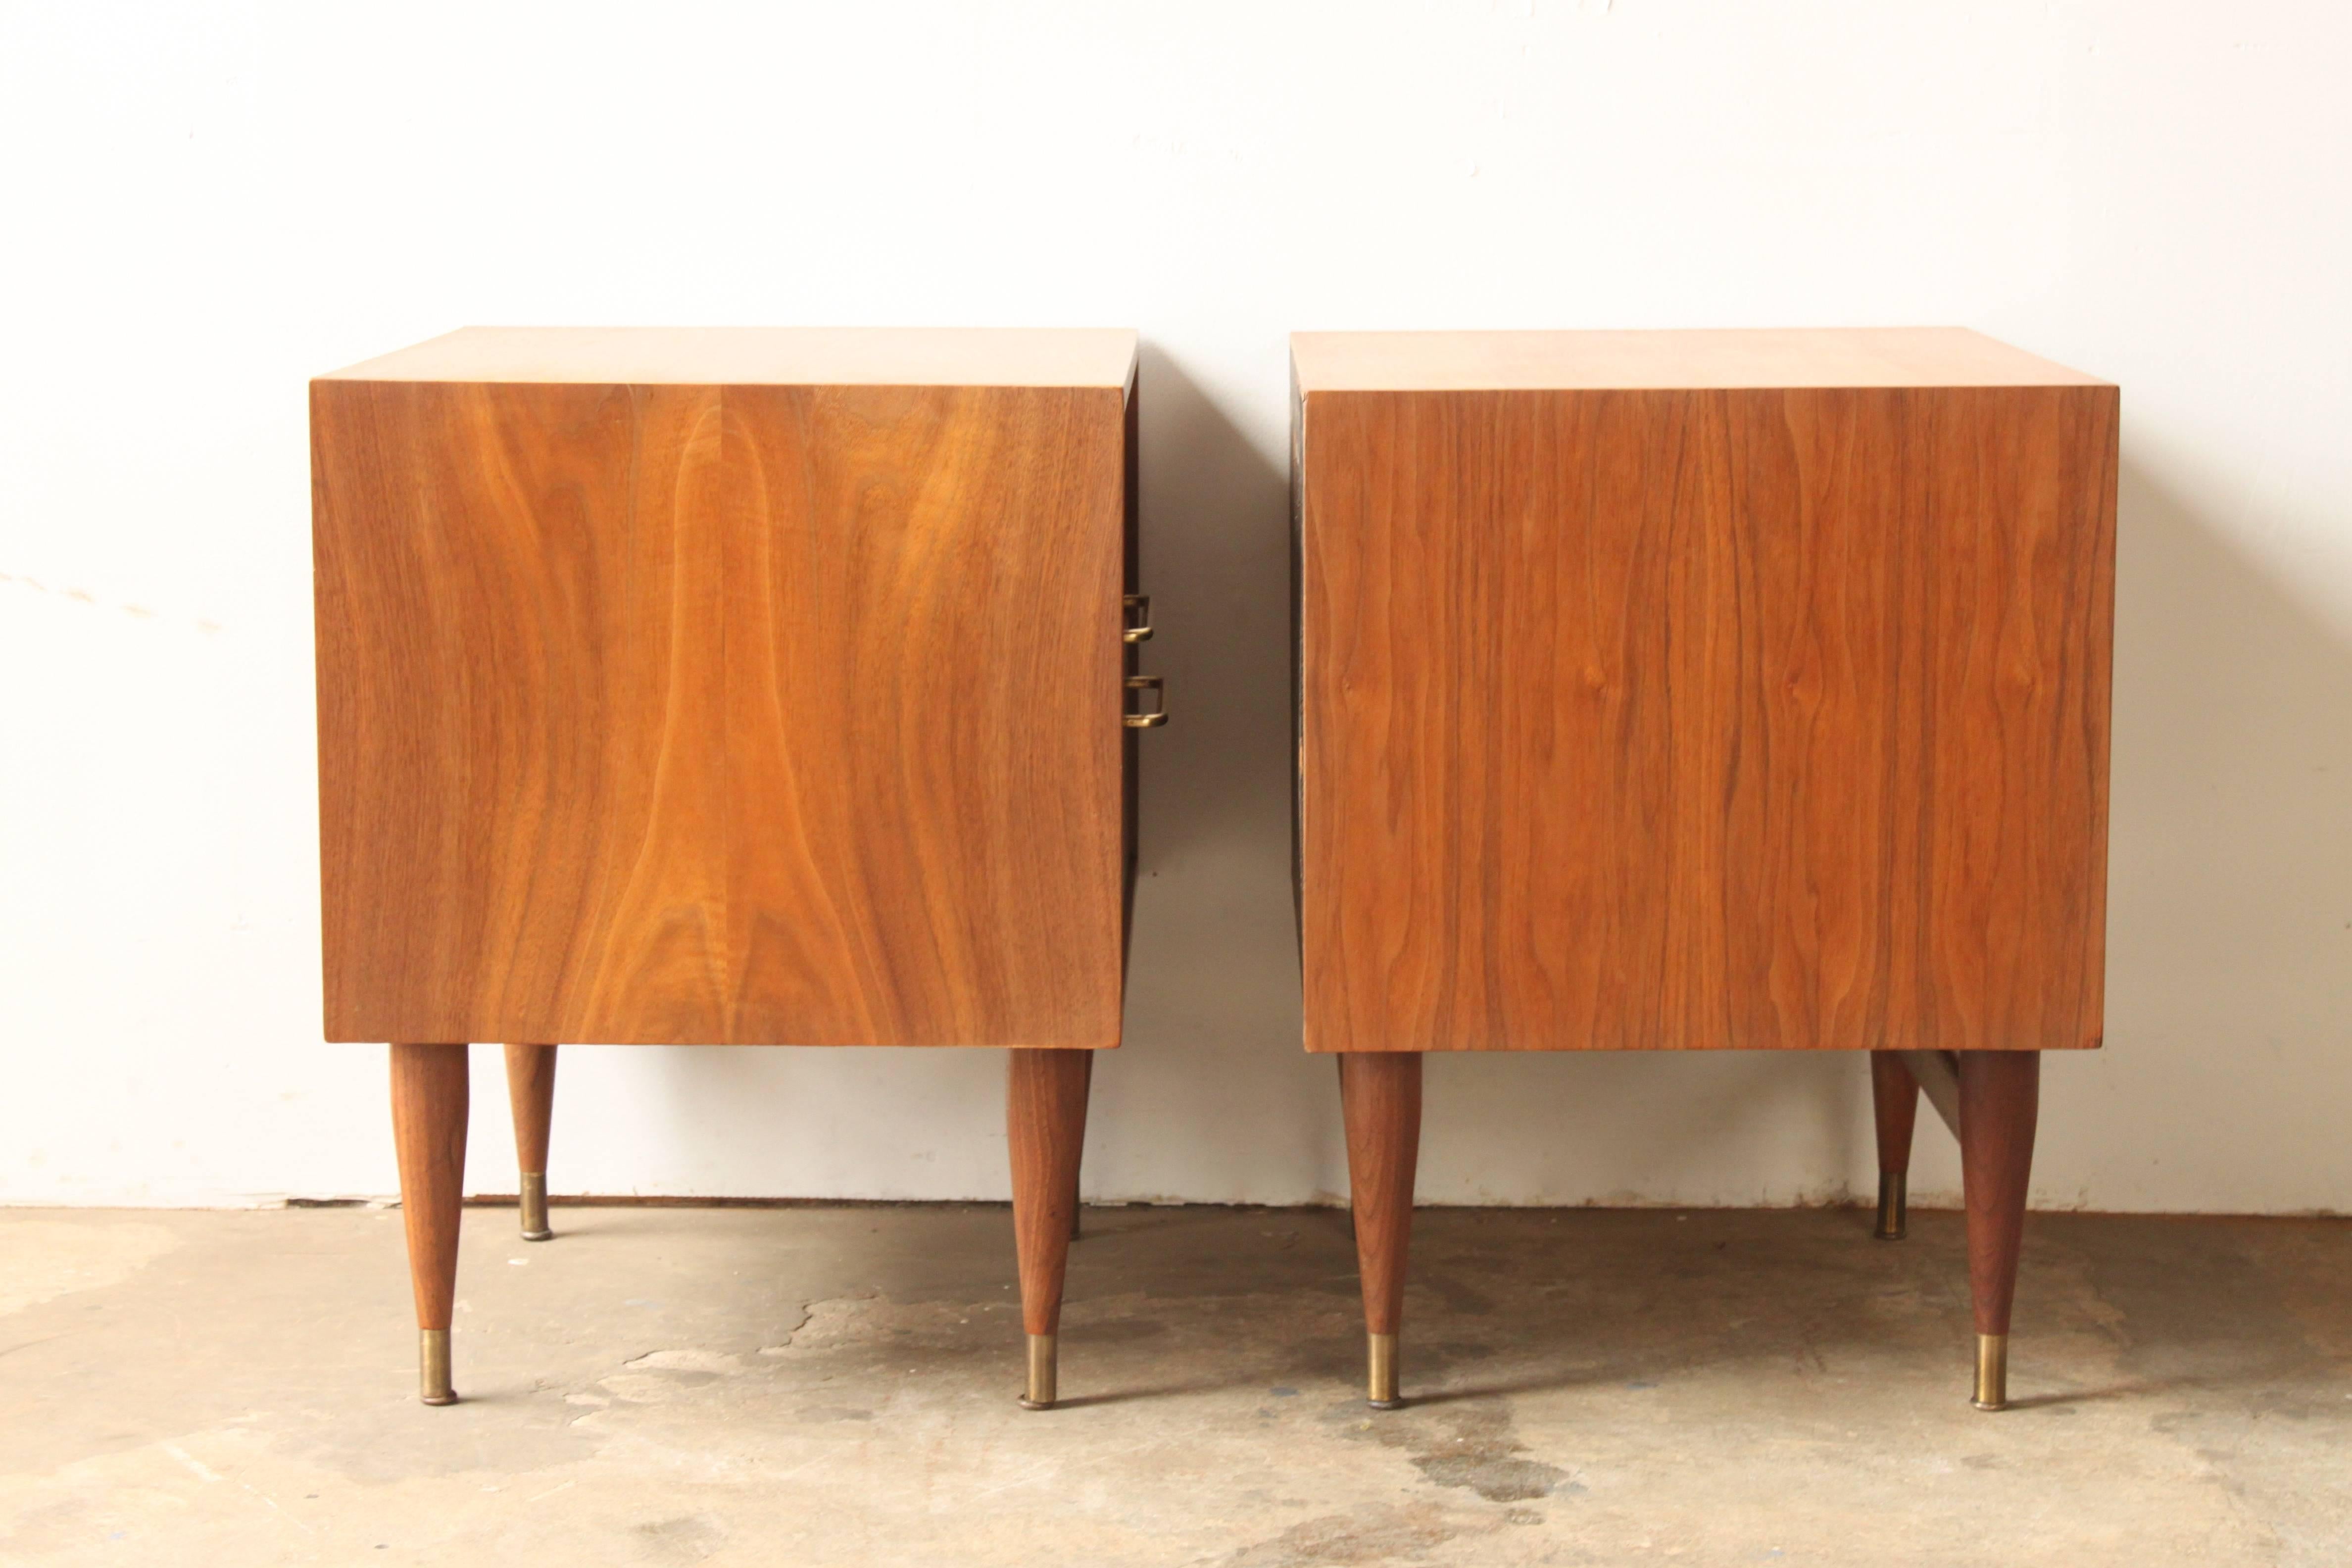 A pair of perfectly executed mid-20th century bedside tables. Rich mellow brown walnut grain is the backdrop for the satin brass drawer pulls and leg tips. Excellent original condition.